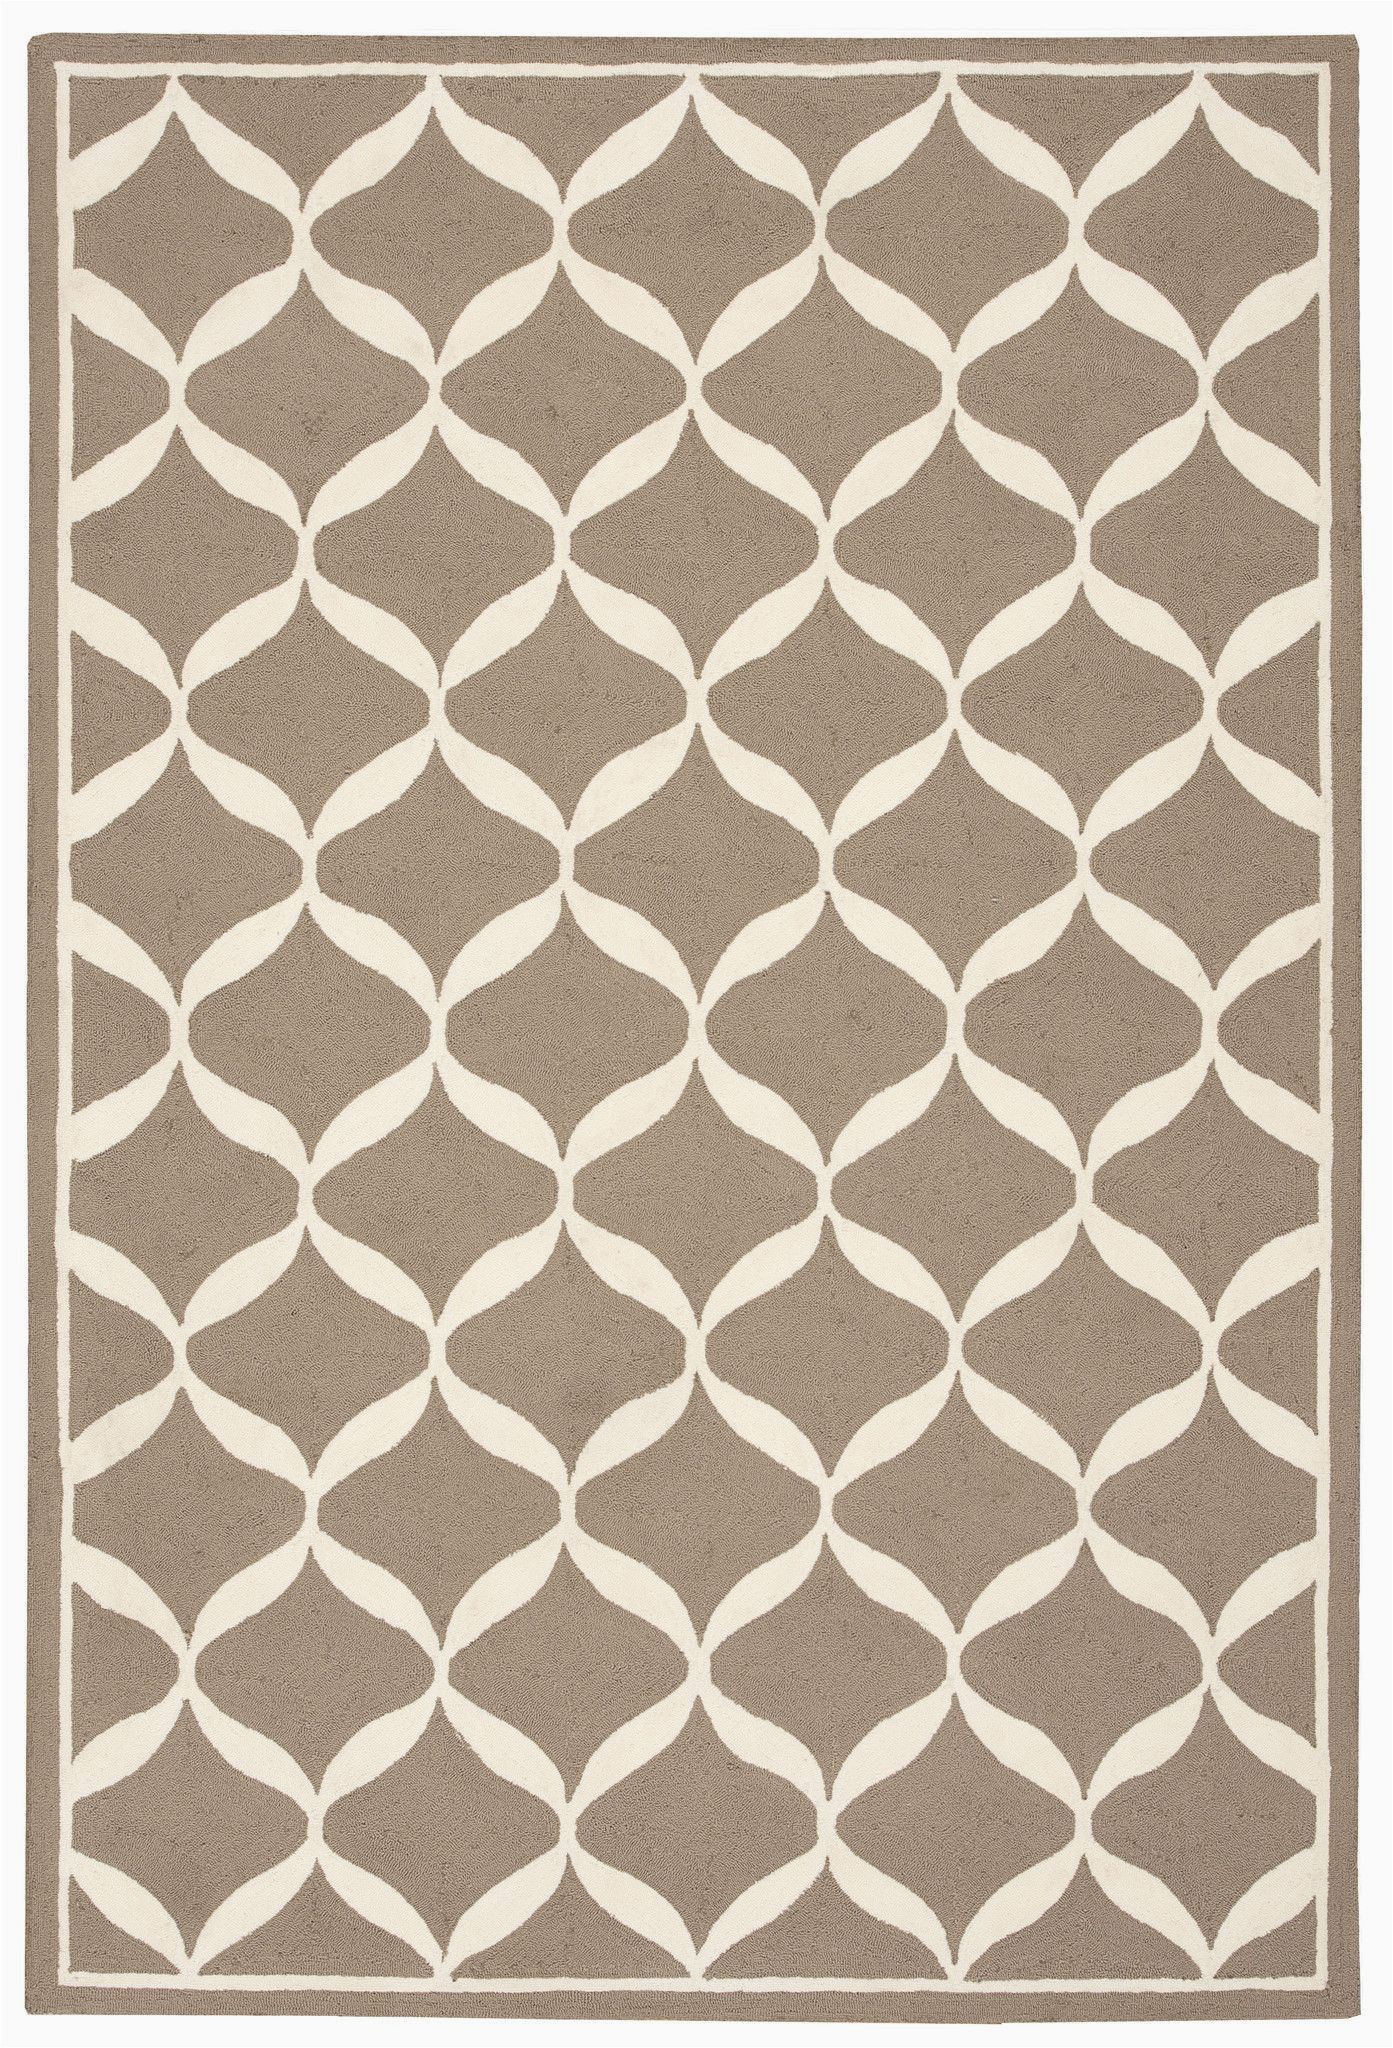 Taupe and White area Rug Nourison Decor Taupe White area Rug Der06 Tauwt Rectangle